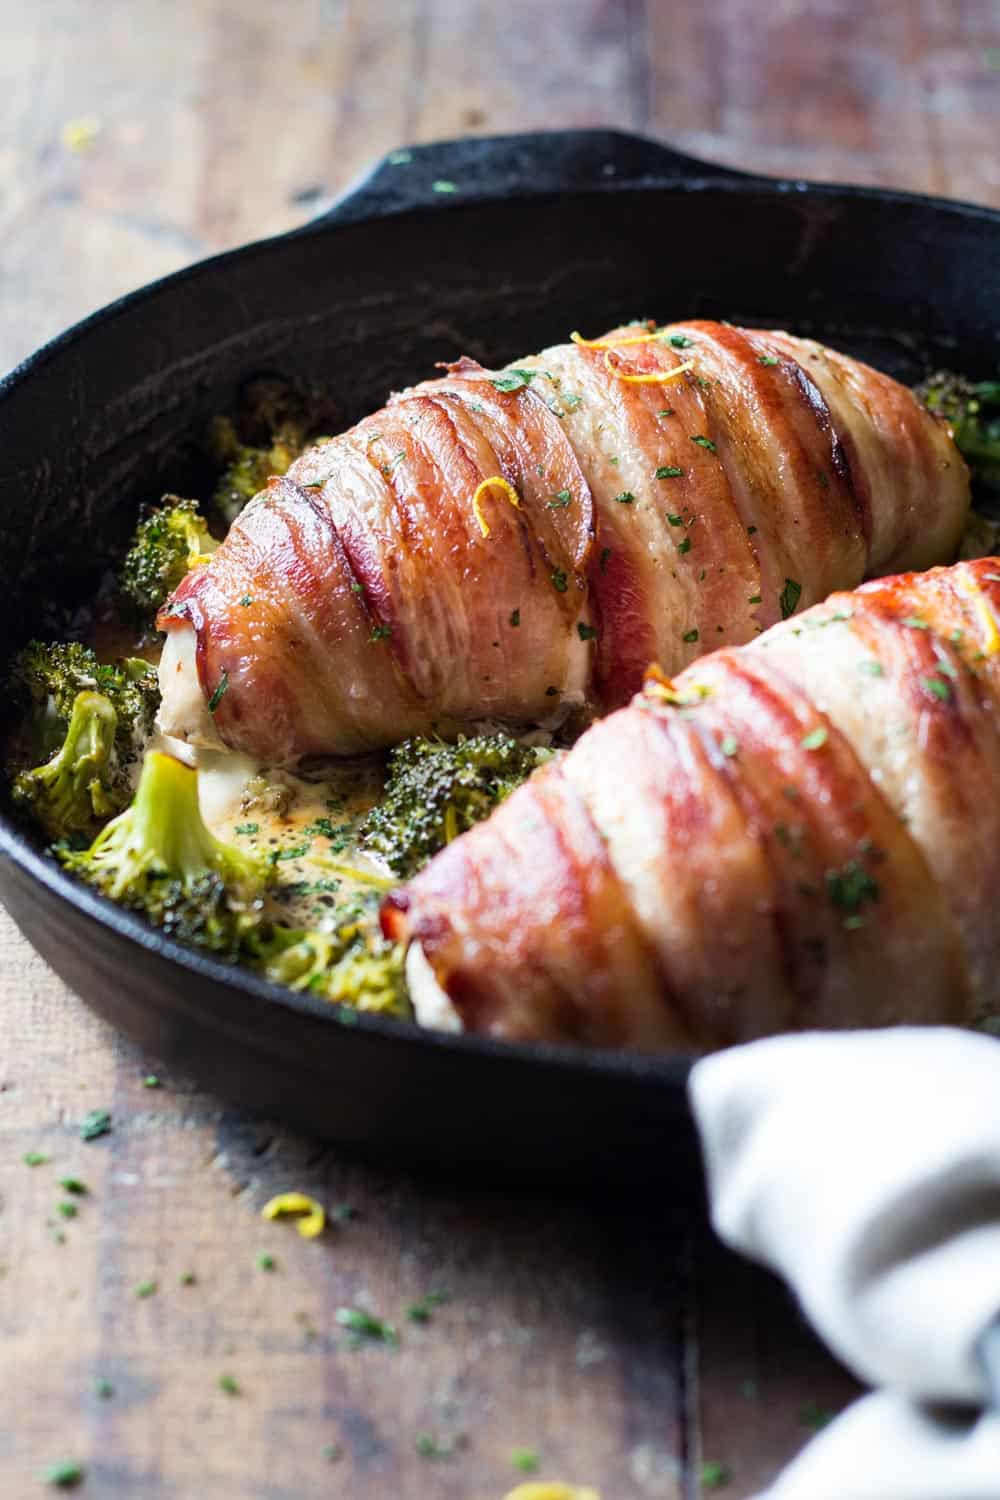 Bacon wrapped chicken breast recipe in a cast iron skillet with broccoli.